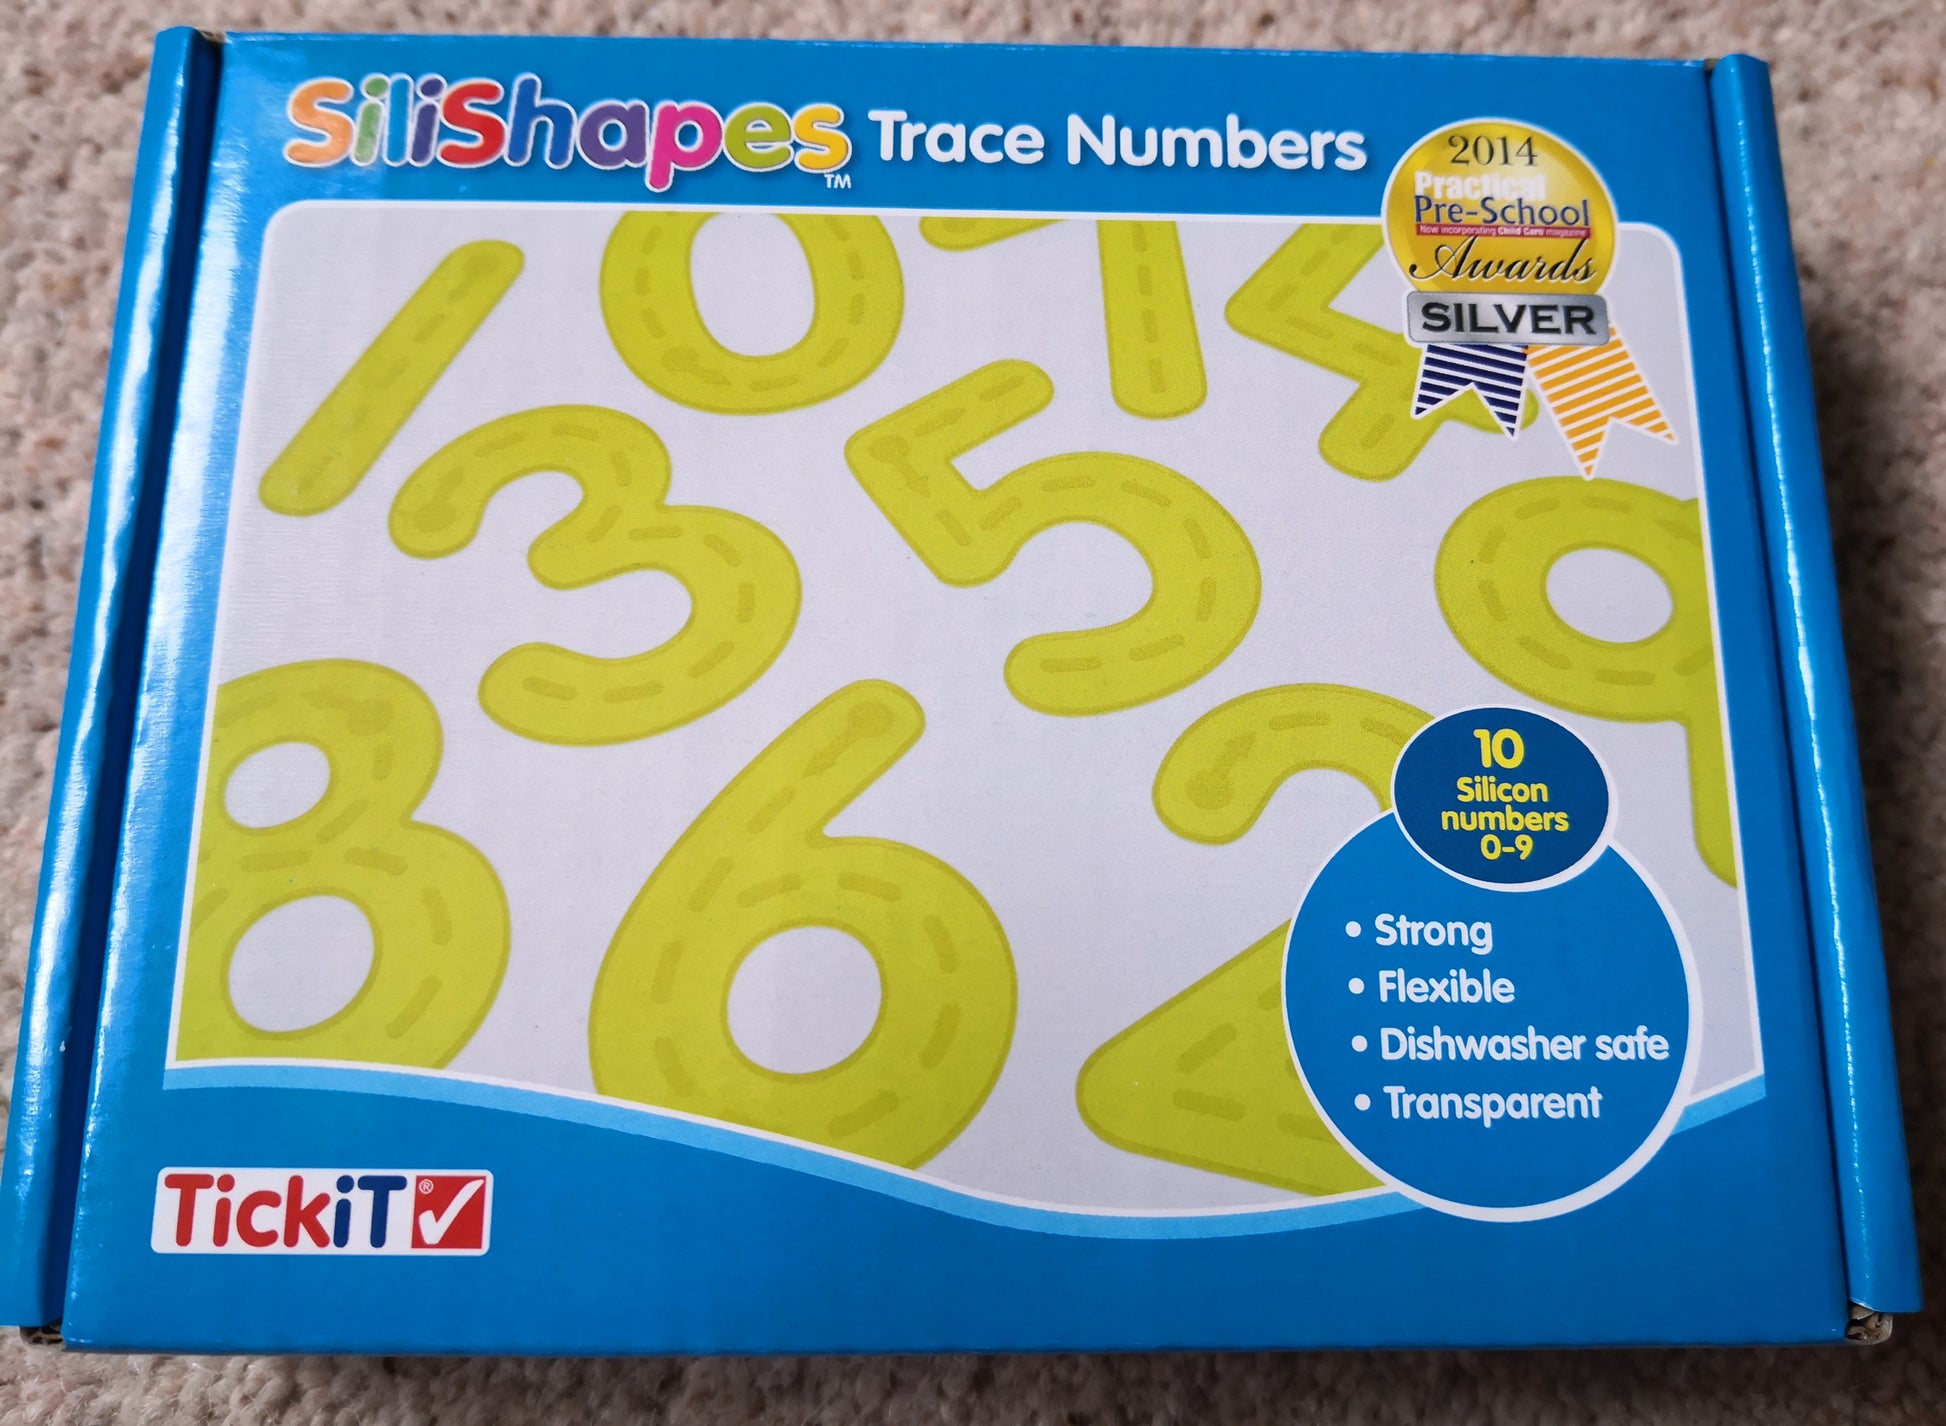 Trace numbers - yellow silishapes